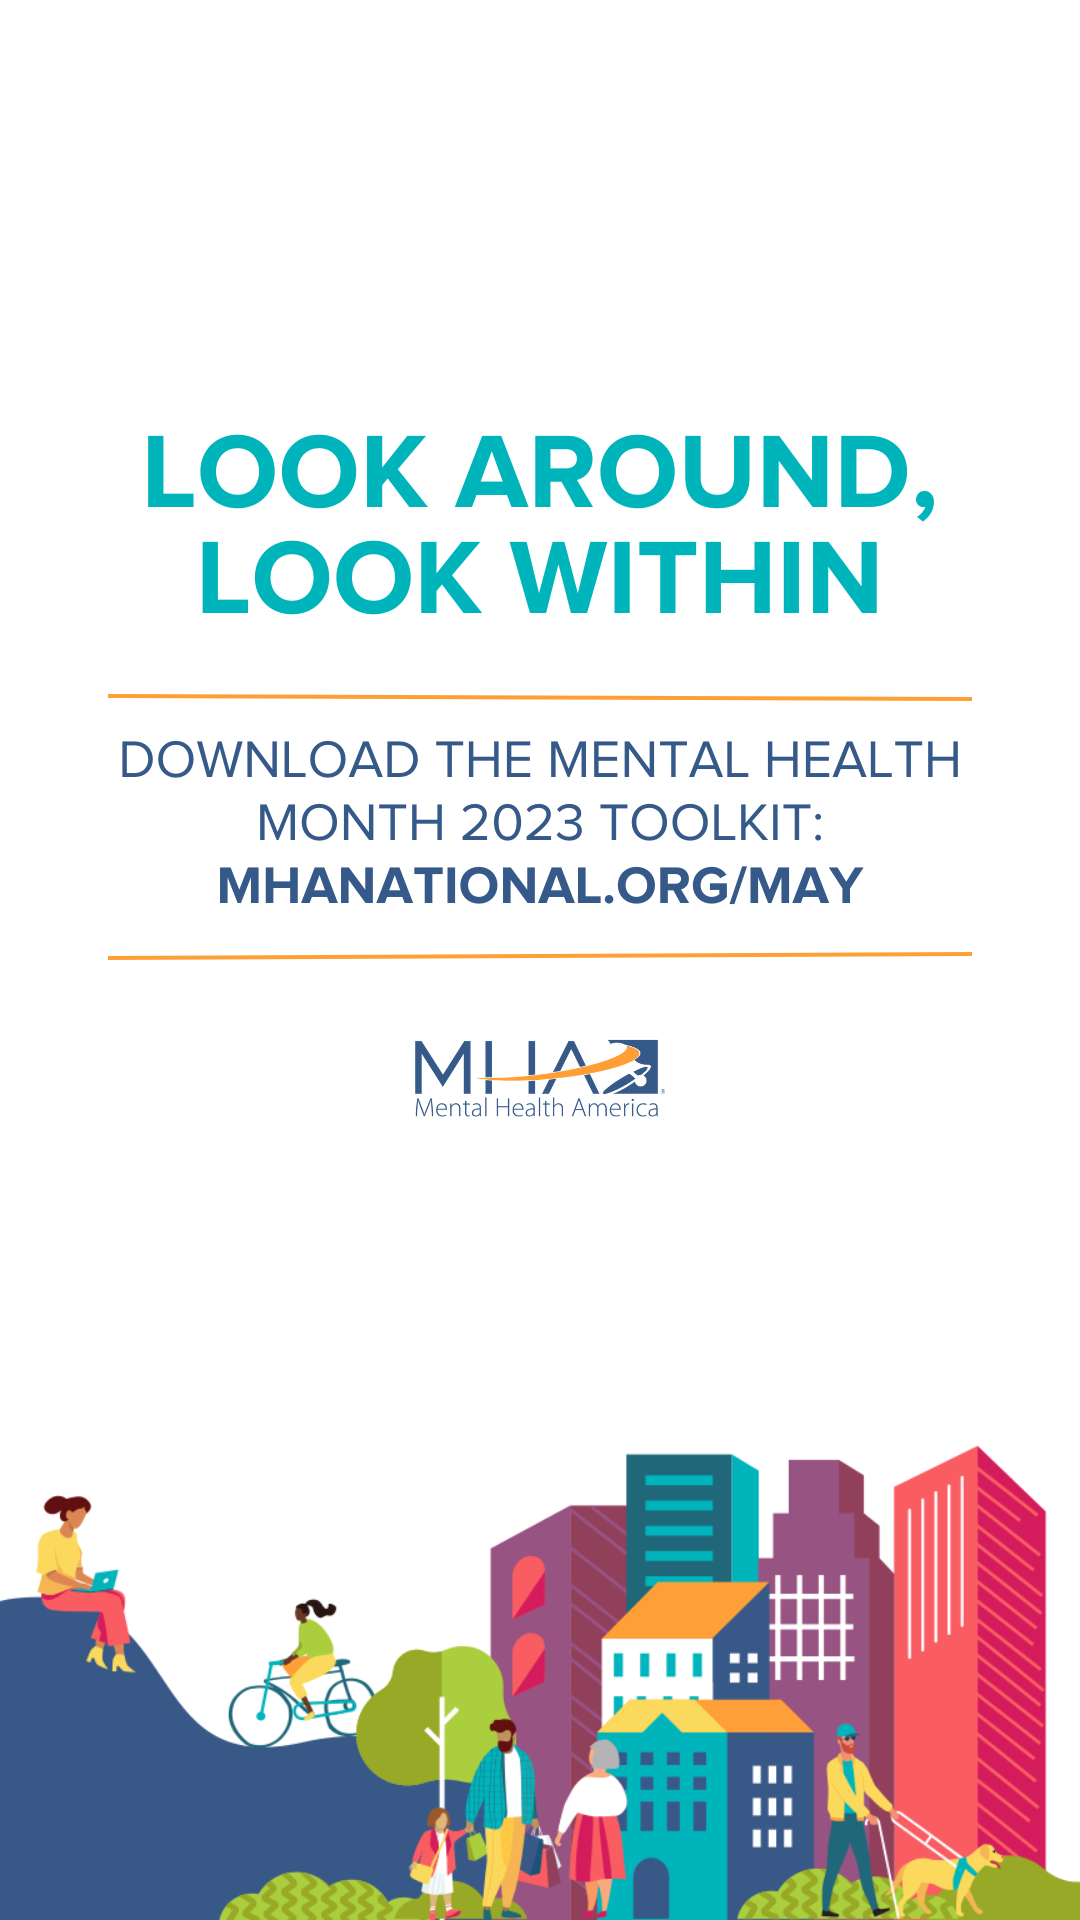 Look around, look within | Download the Mental Health Month 2023 toolkit: mhanational.org/may